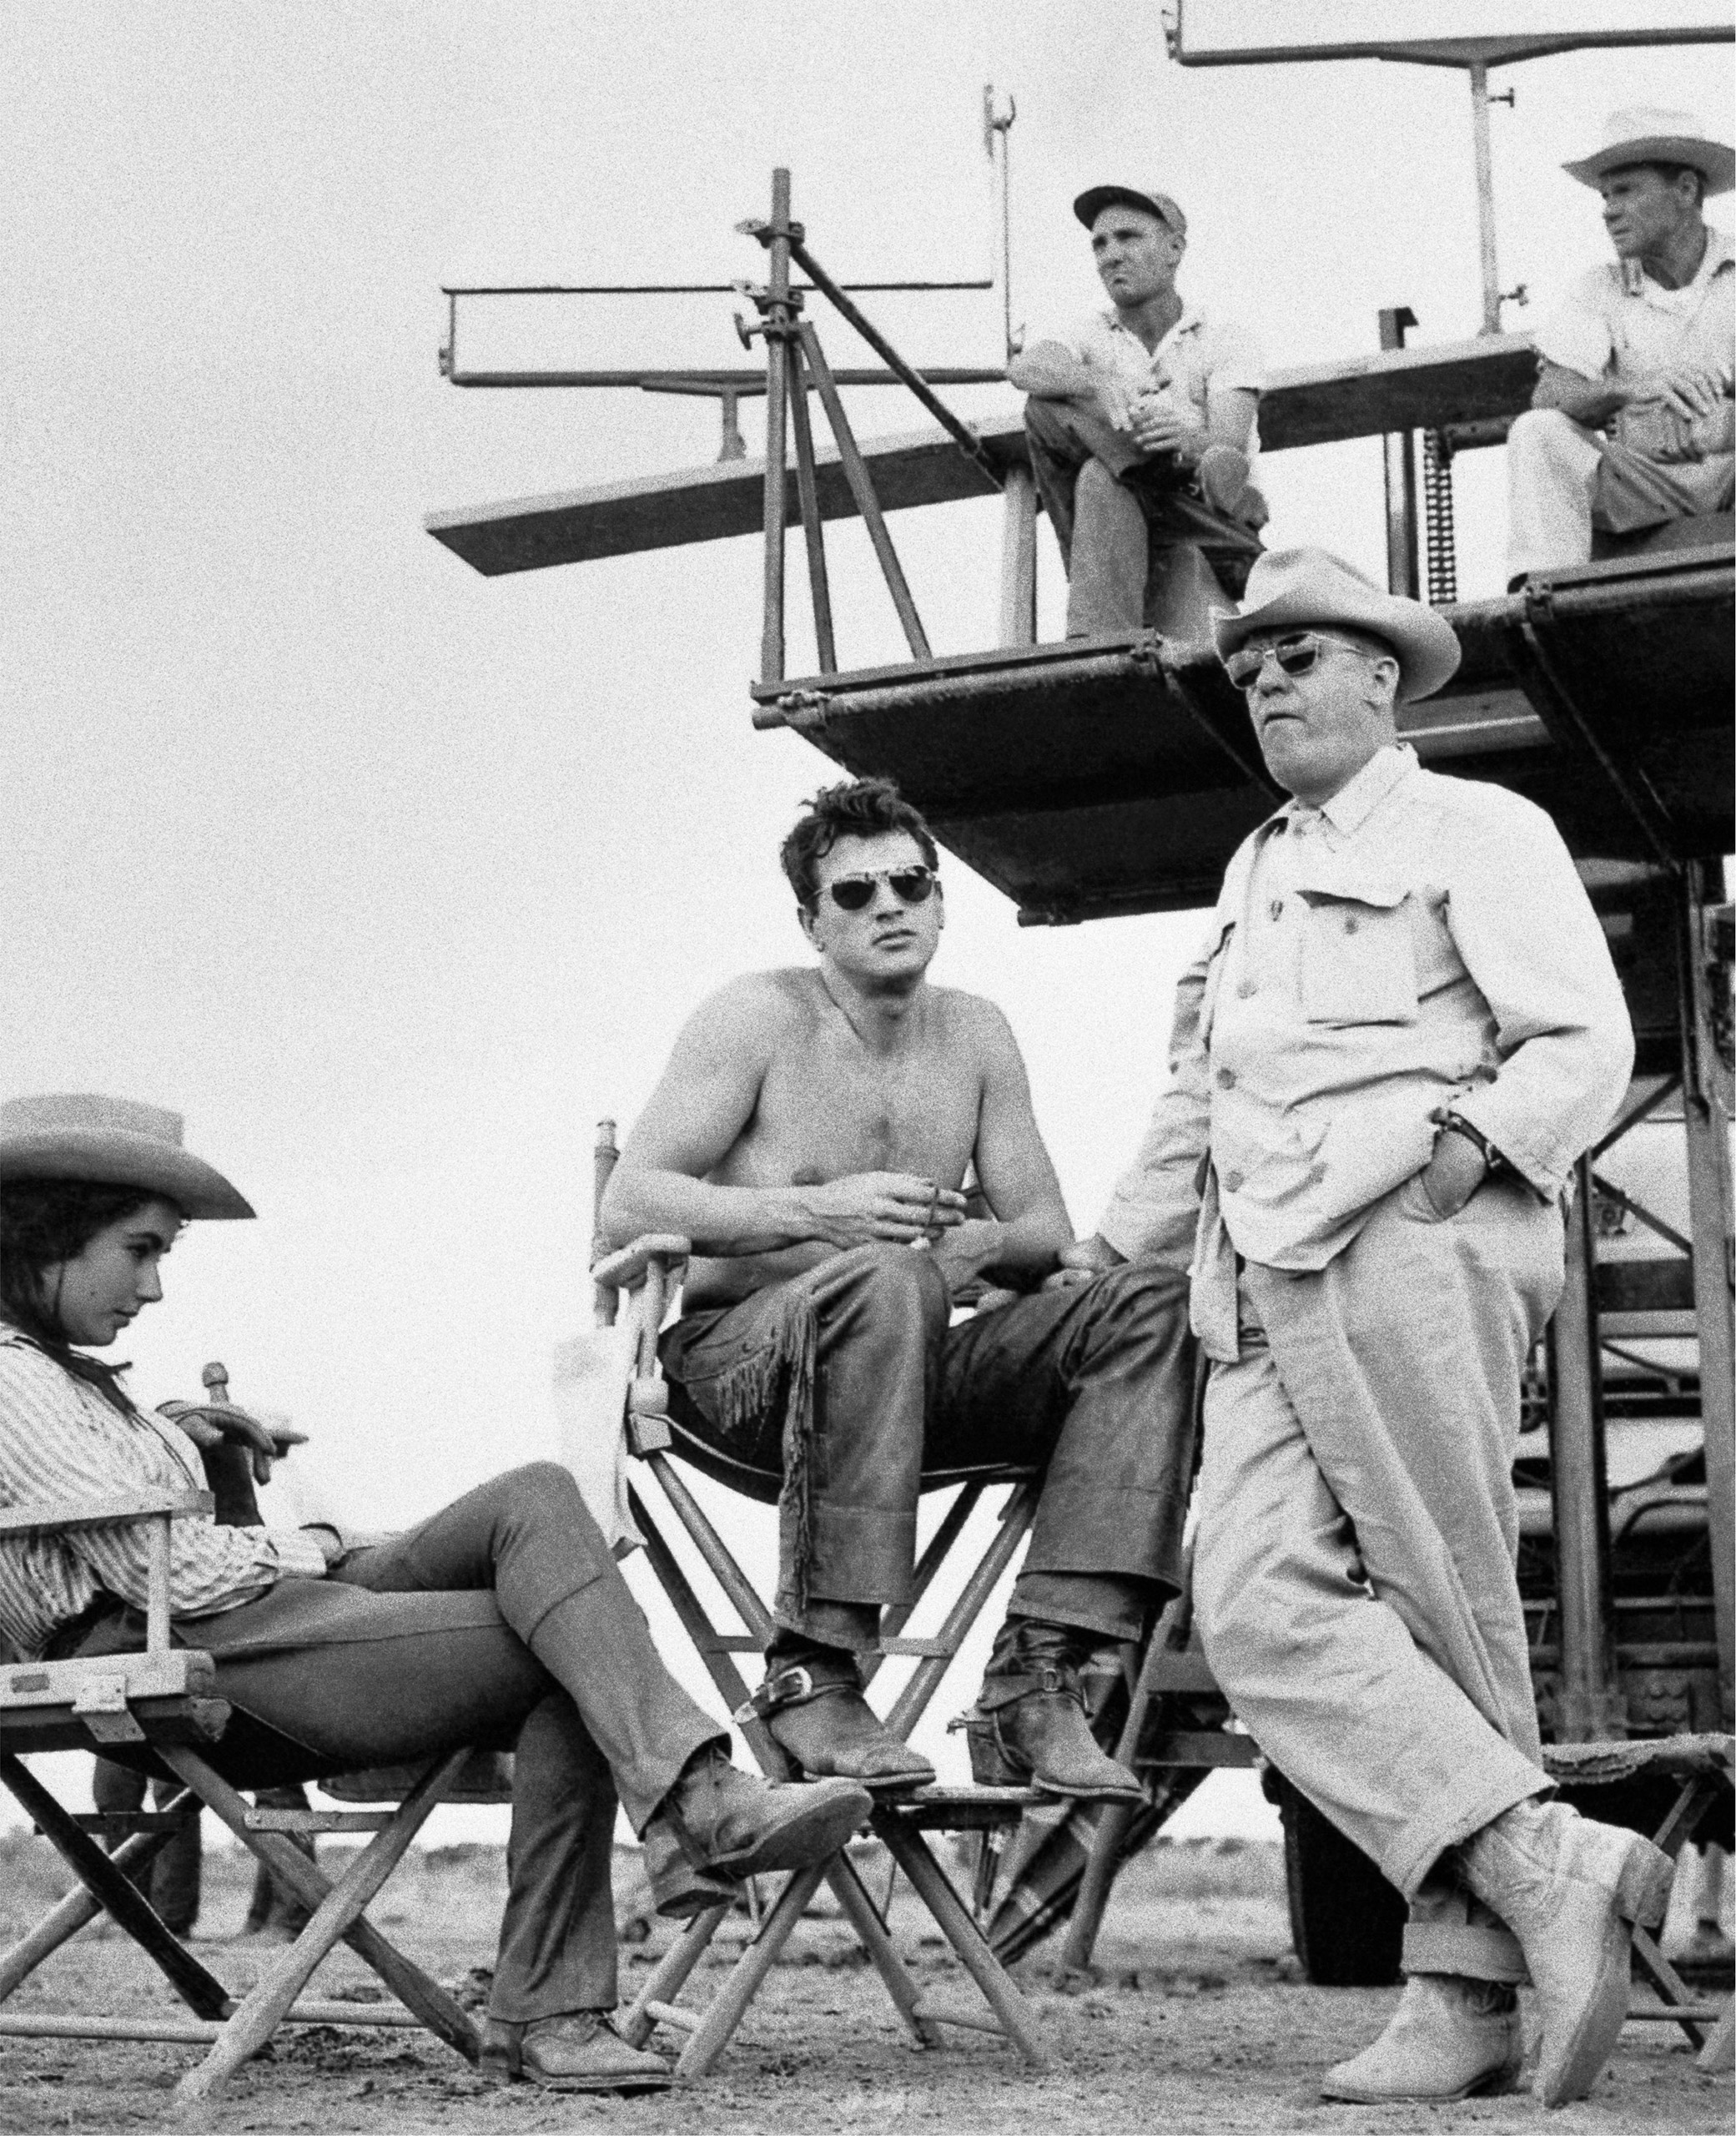 Elizabeth Taylor, actor Rock Hudson and director George Stevens on the set of the movie "Giant," 1956.